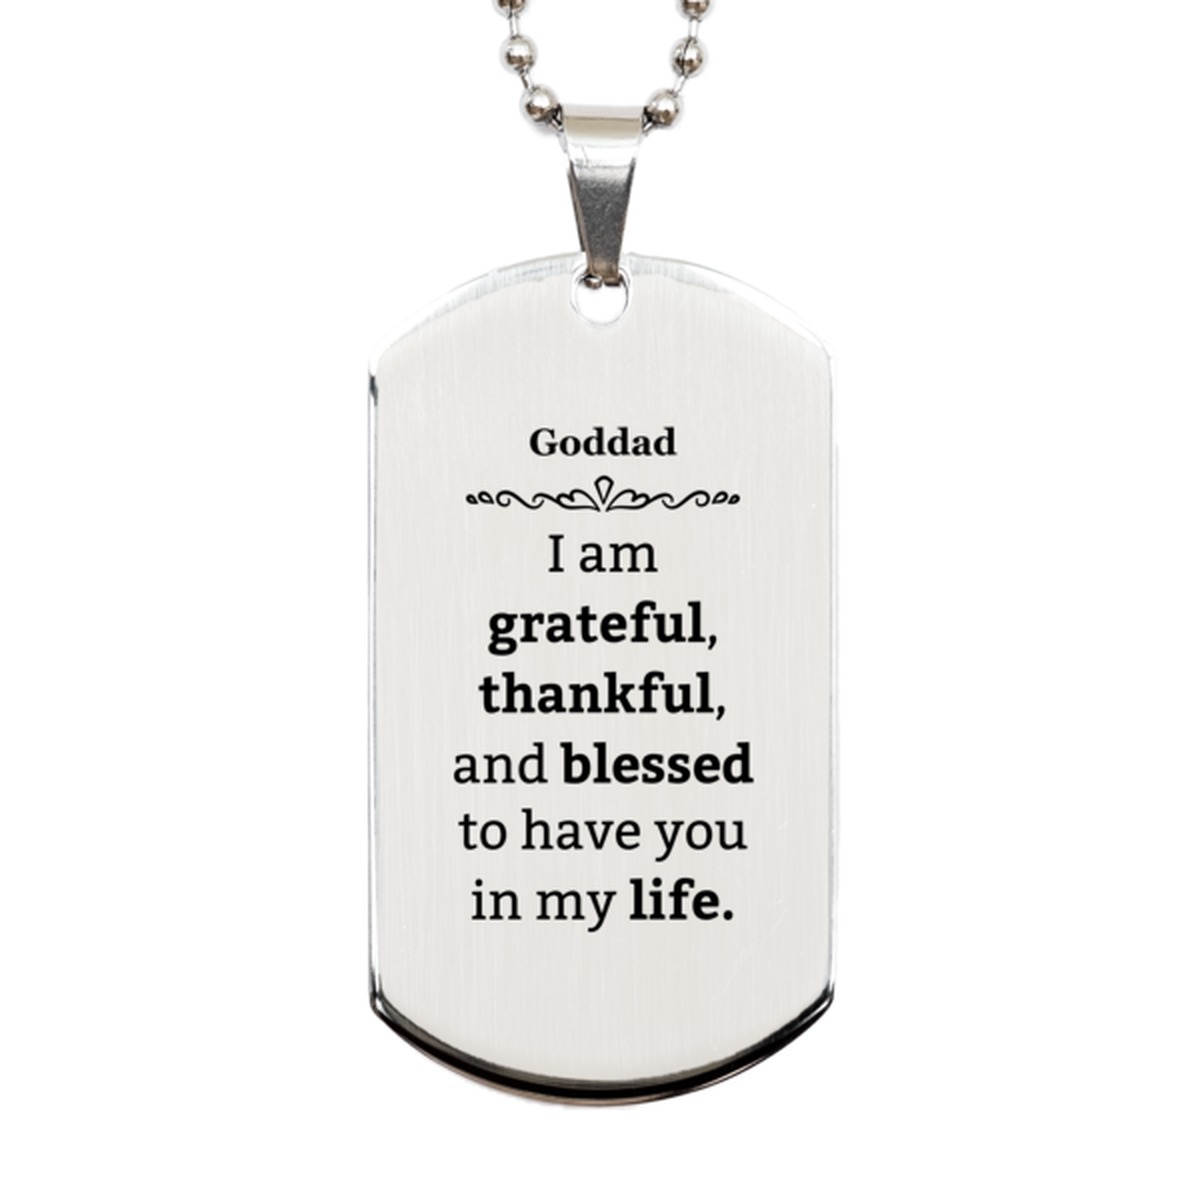 Goddad Appreciation Gifts, I am grateful, thankful, and blessed, Thank You Silver Dog Tag for Goddad, Birthday Inspiration Gifts for Goddad